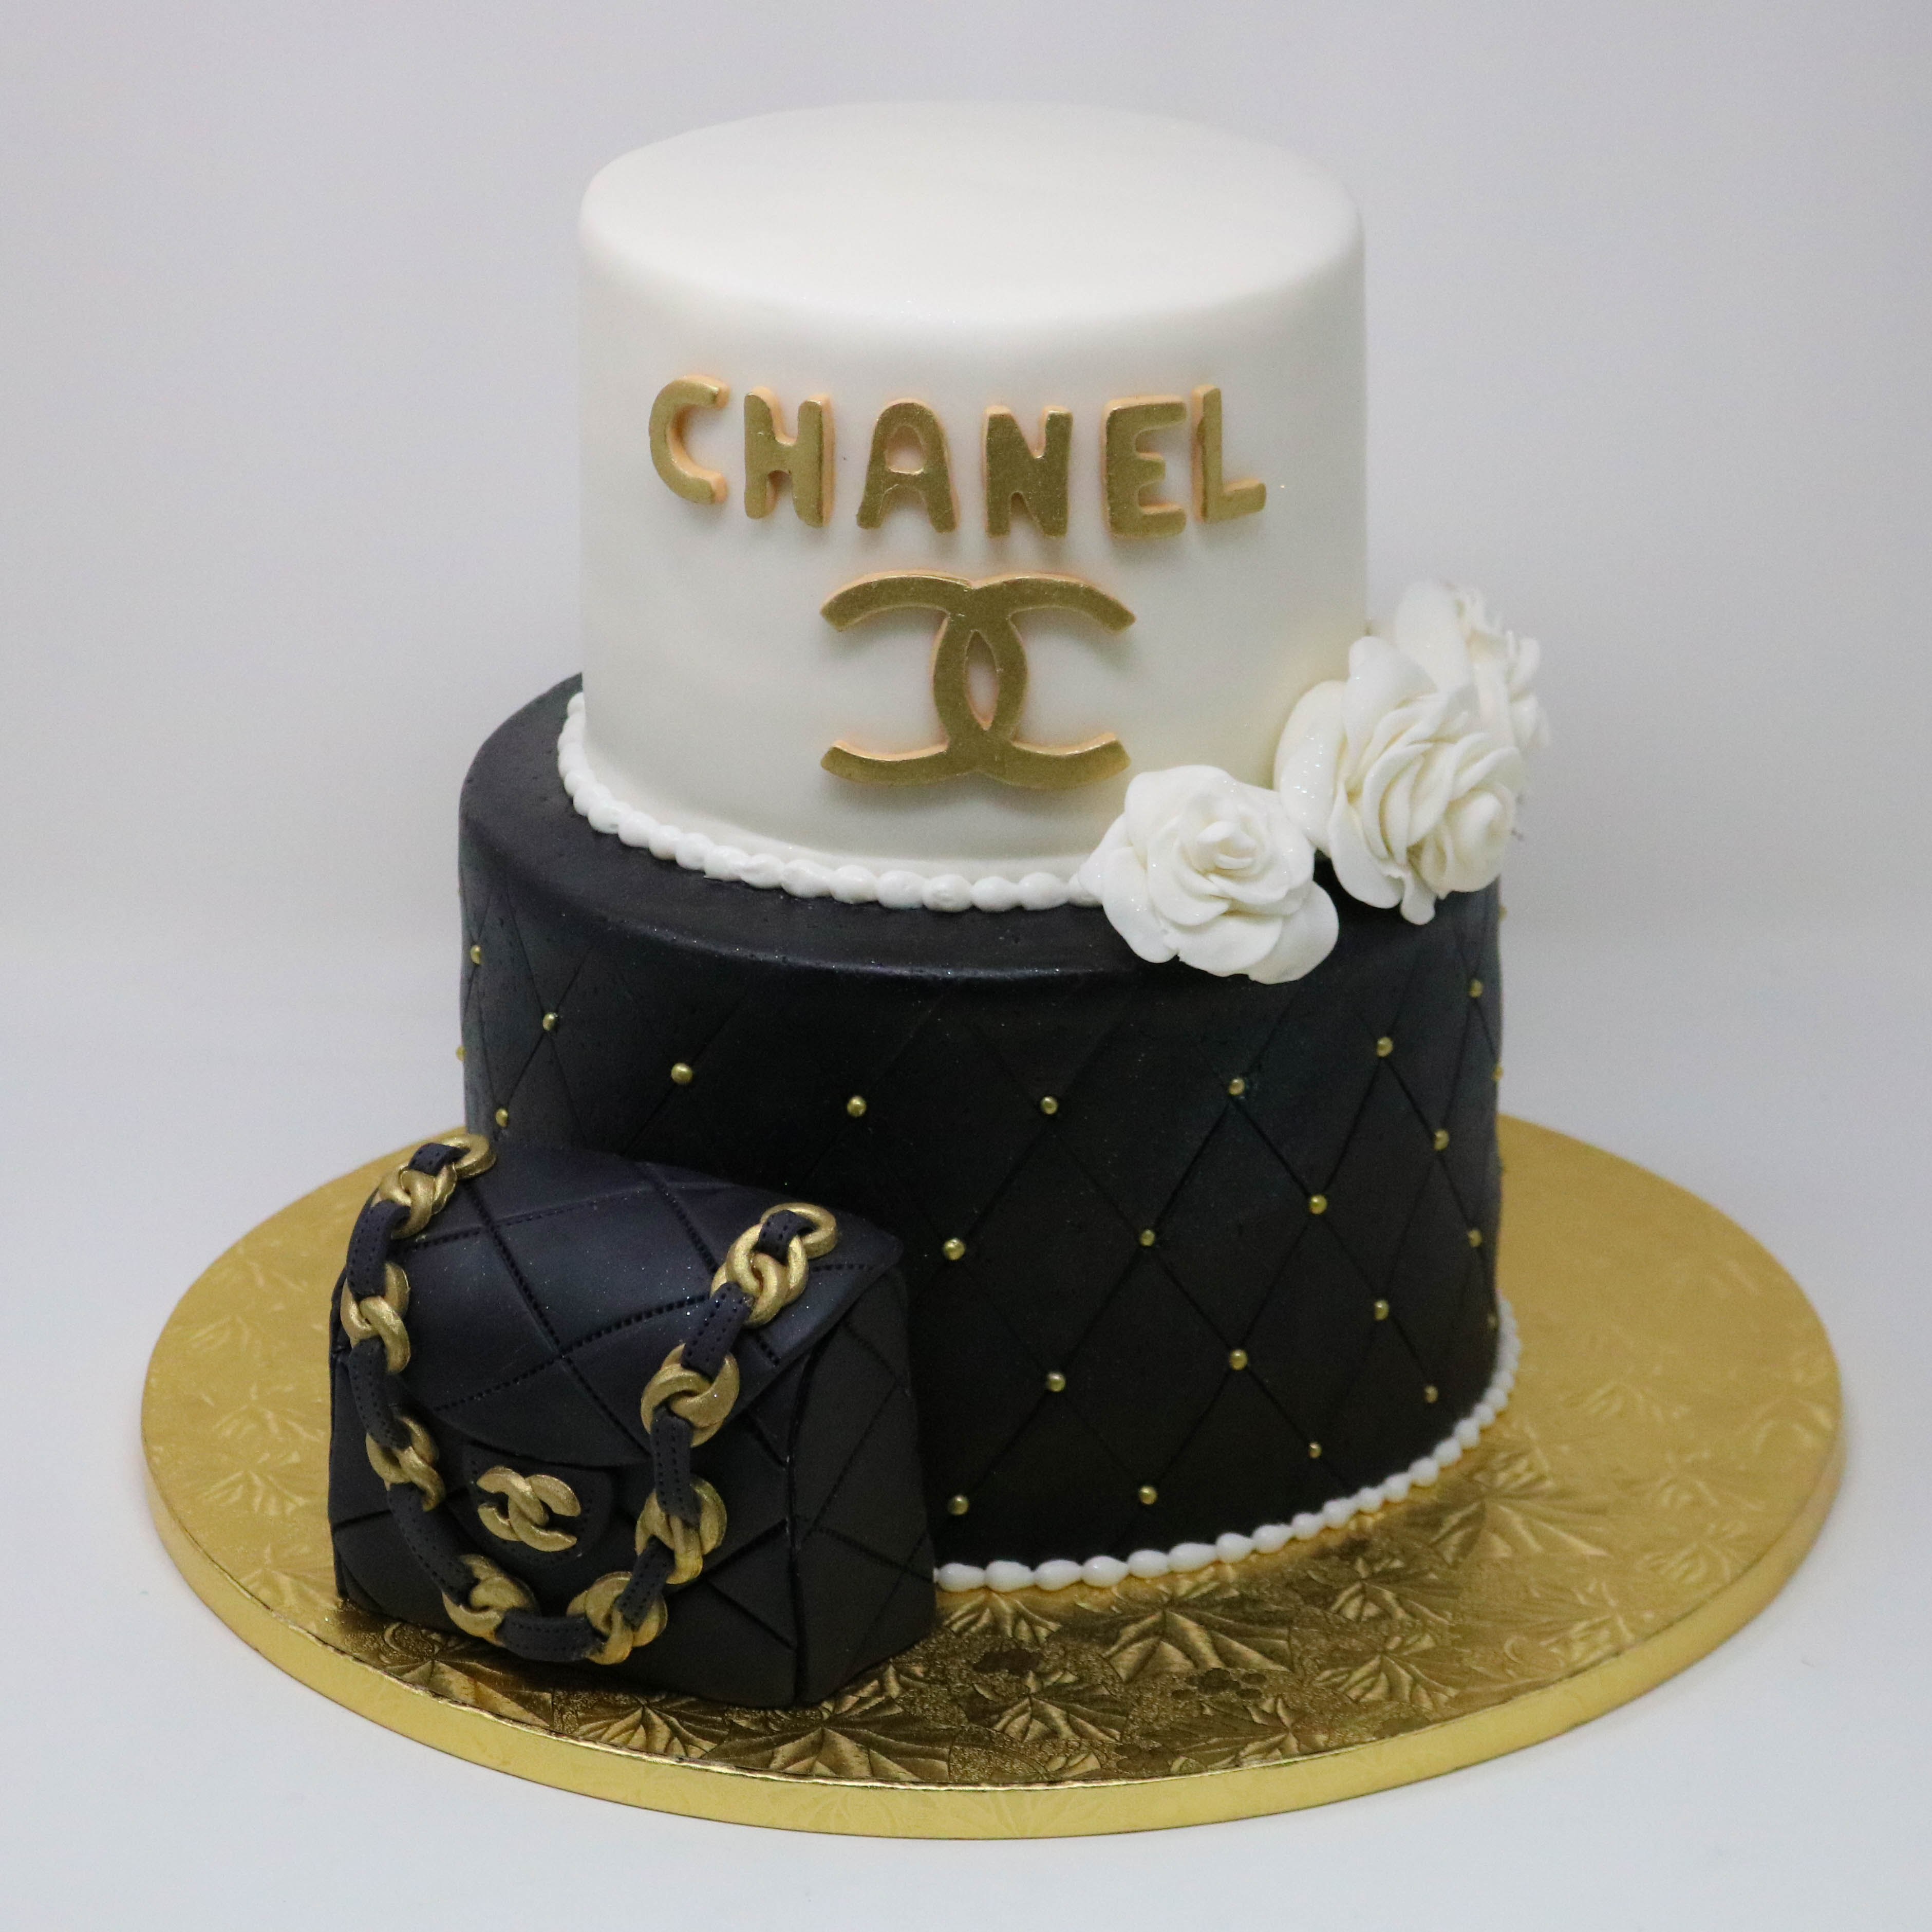 Cakes Today on X: A stunning sculpted Chanel Bag 👜 & Louis Vuitton  briefcase cake. 💼 Have a different design in mind? Let us know what kind  of Louis Vuitton bag cake